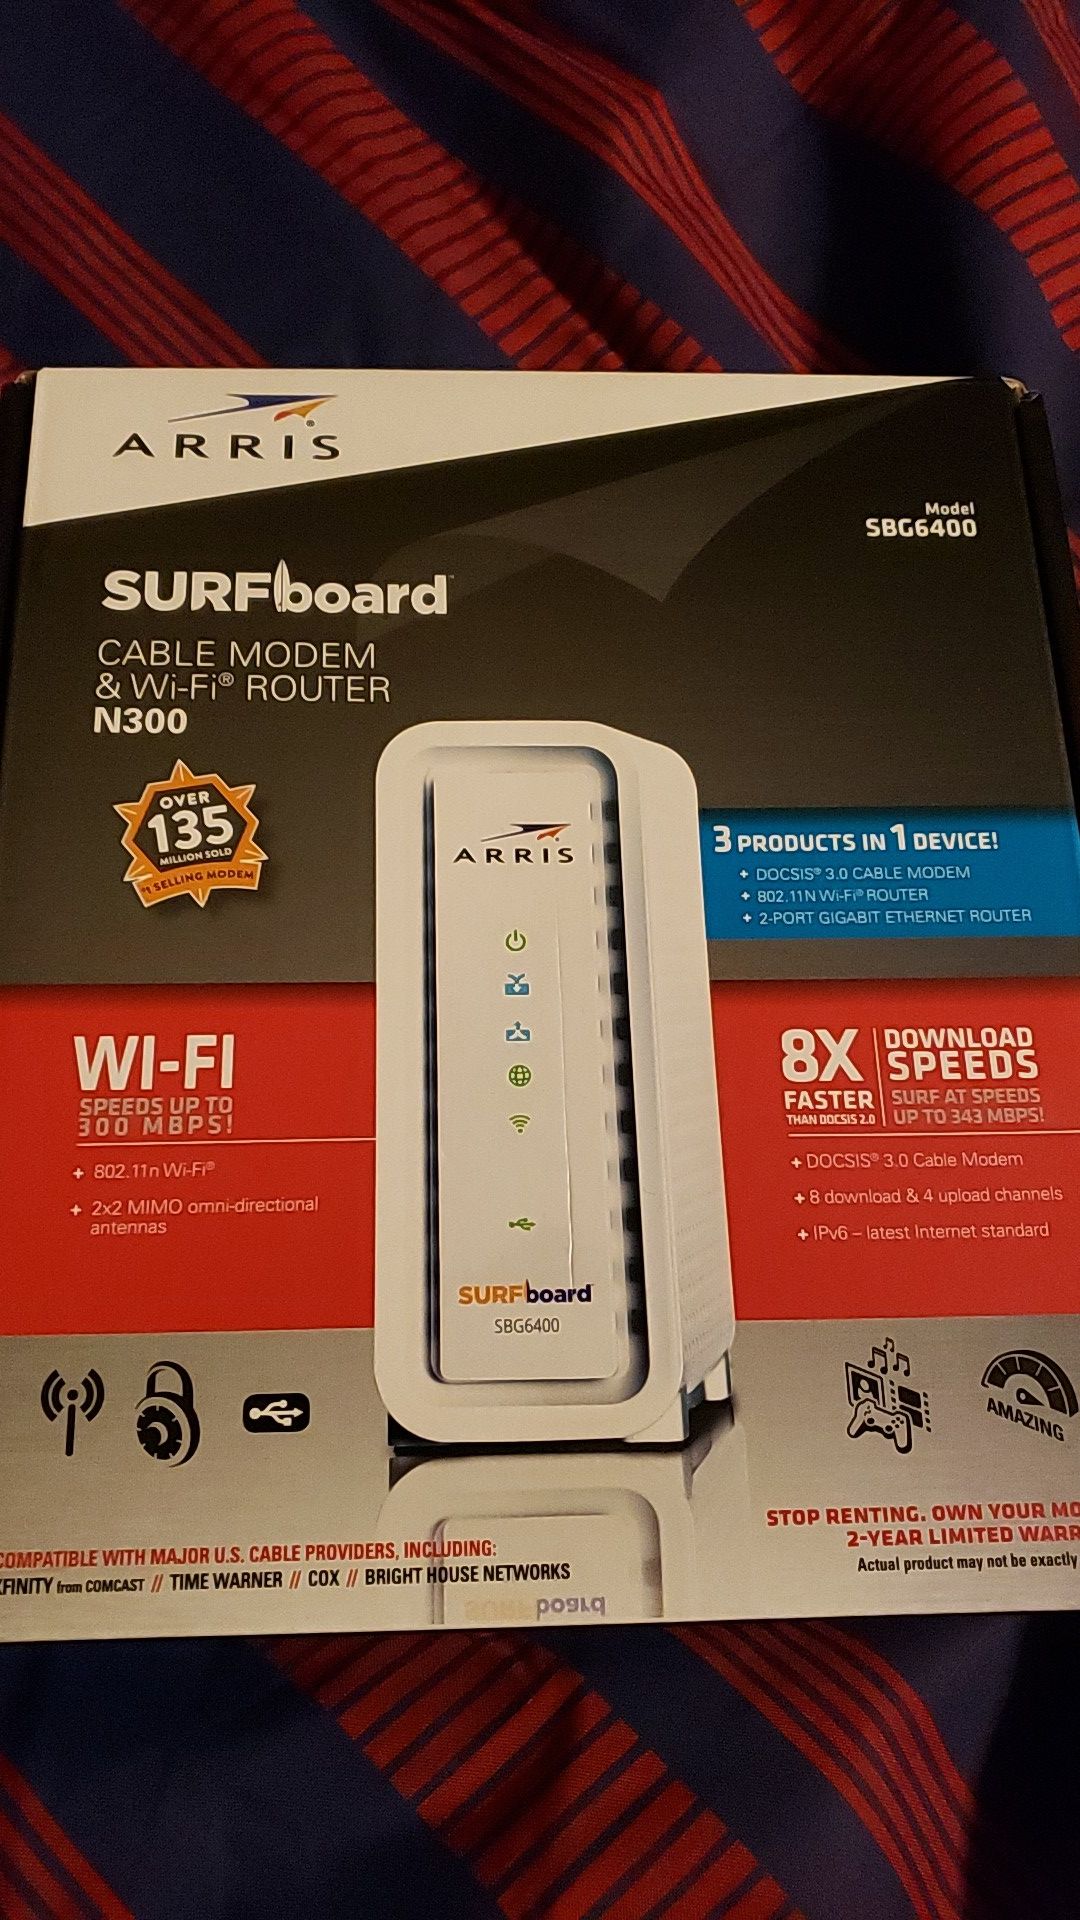 Cable modem and WiFi router.